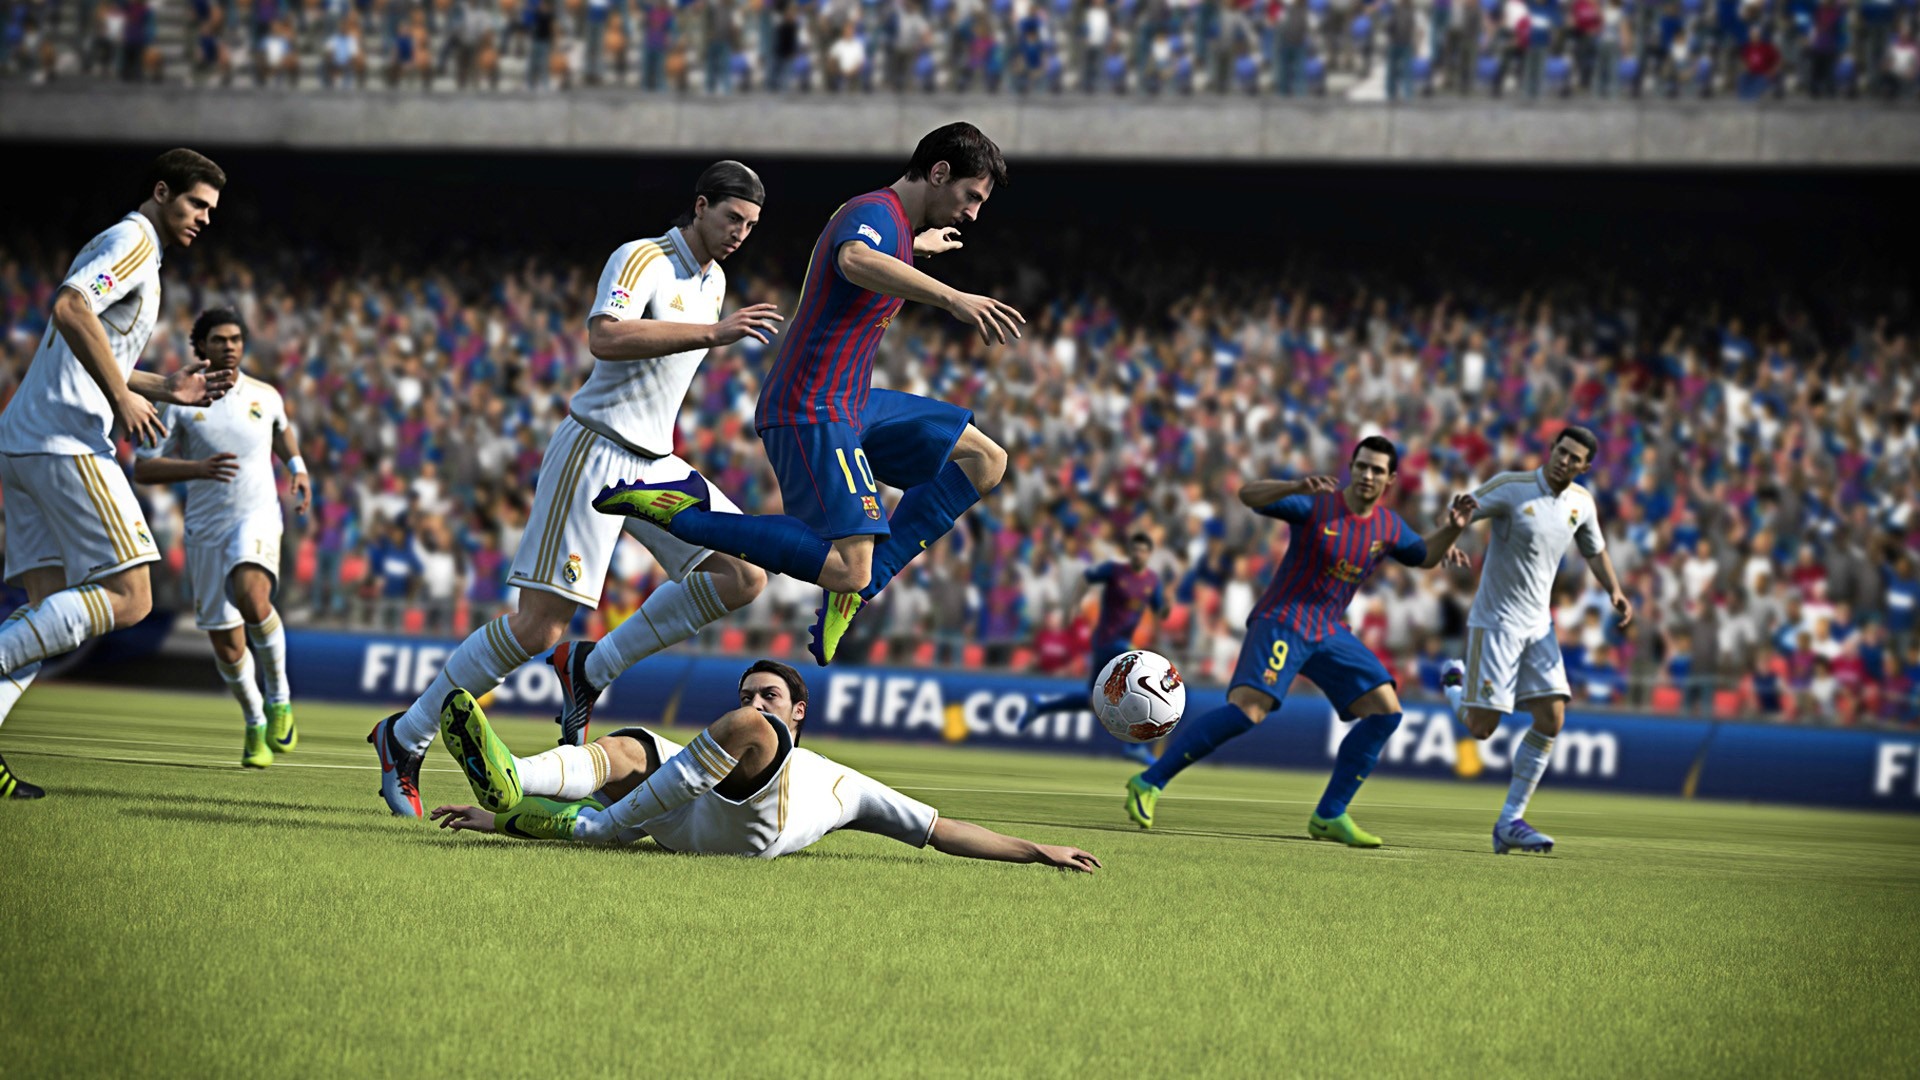 FIFA 13 game HD wallpapers #4 - 1920x1080